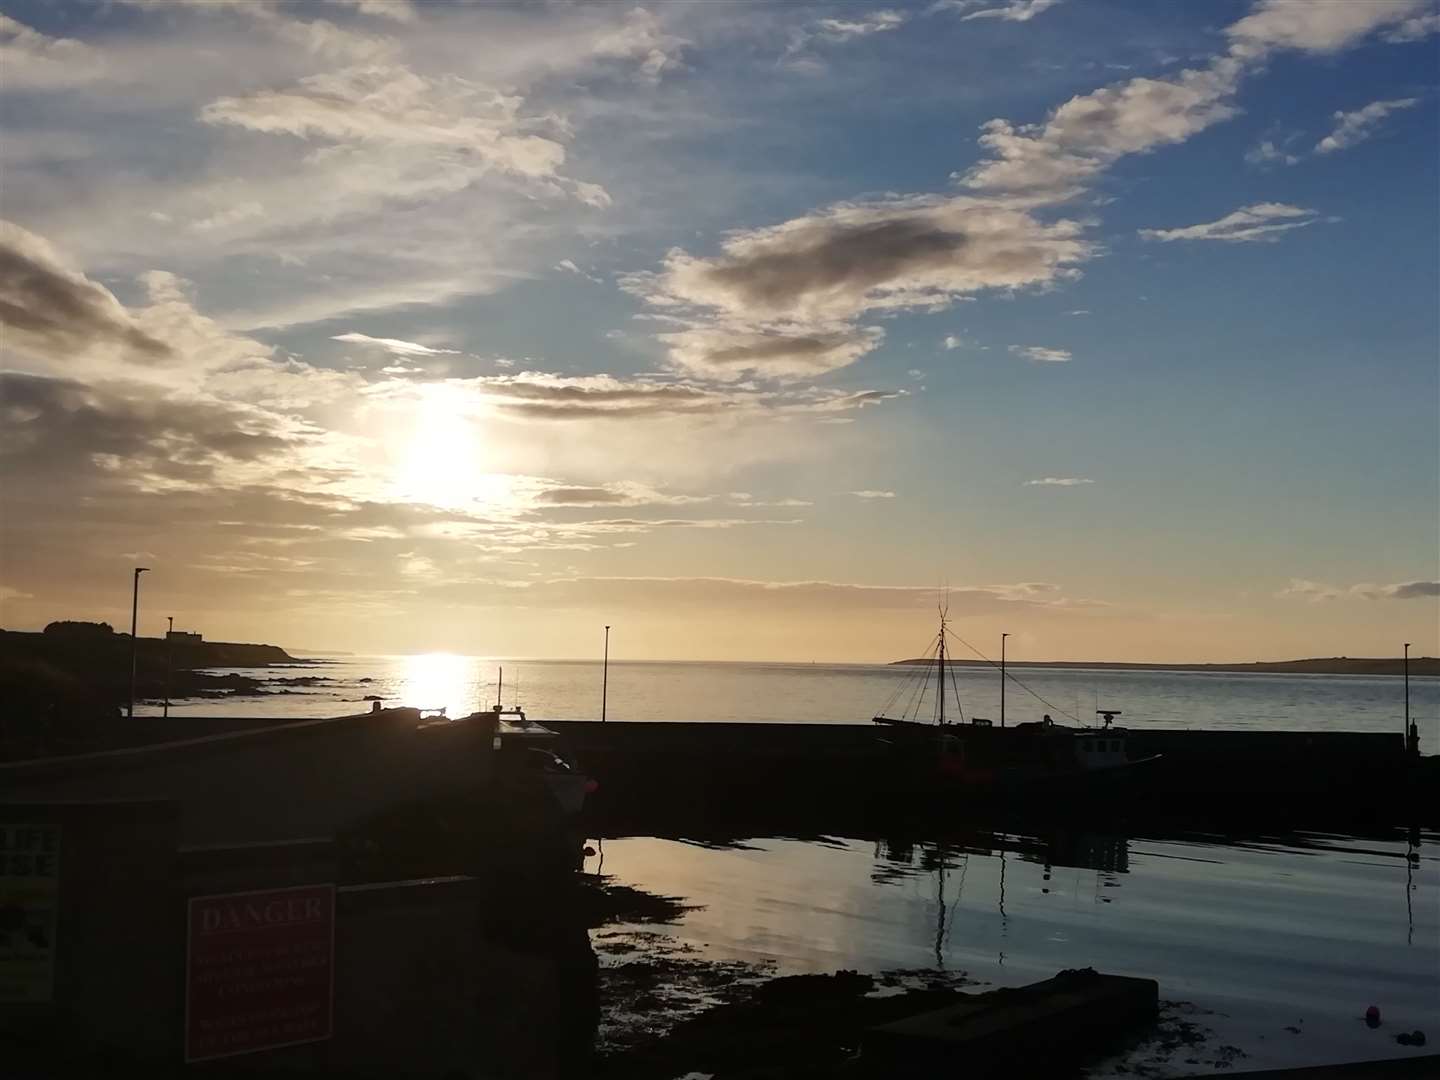 Carole Whittaker took this photo of John O'Groats harbour in the evening sunshine recently.